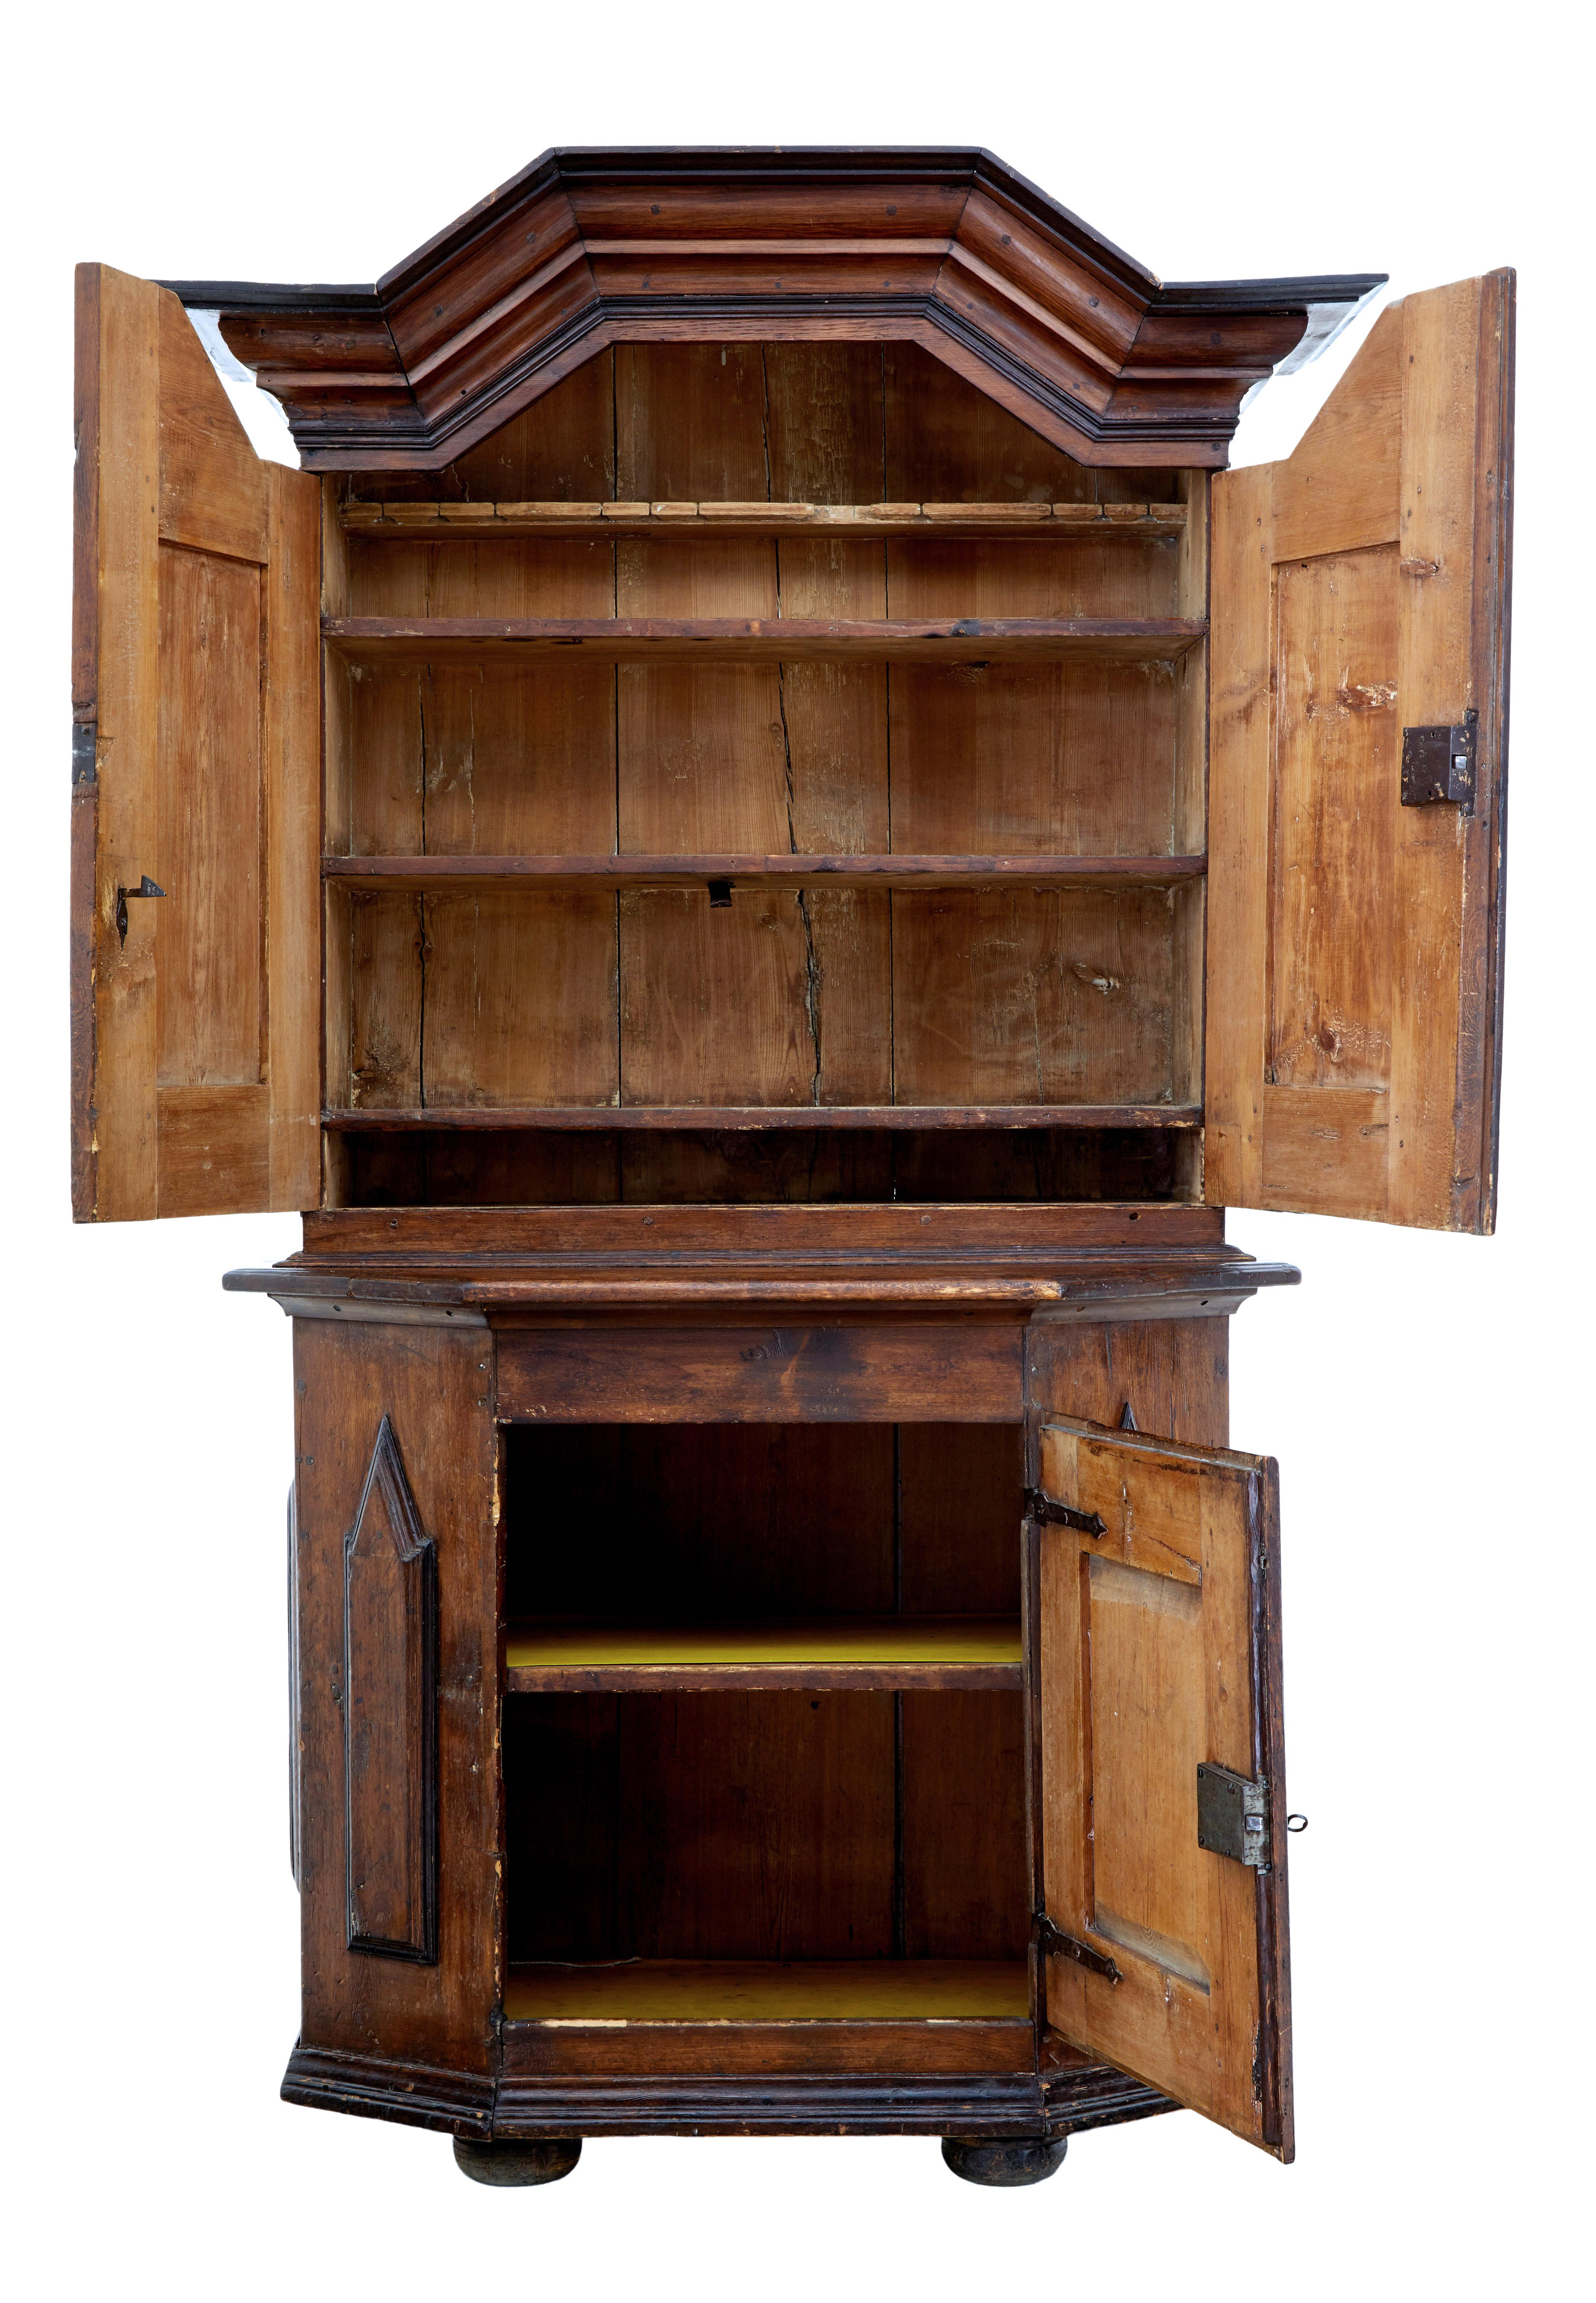 Rustic Swedish 2 part baroque cupboard, circa 1790.

Stained pine baroque cupboard, a real piece of Scandinavian rustic made furniture. Shaped cornice below and double door cupboard containing various fixed shelves. Shaped bottom section with a